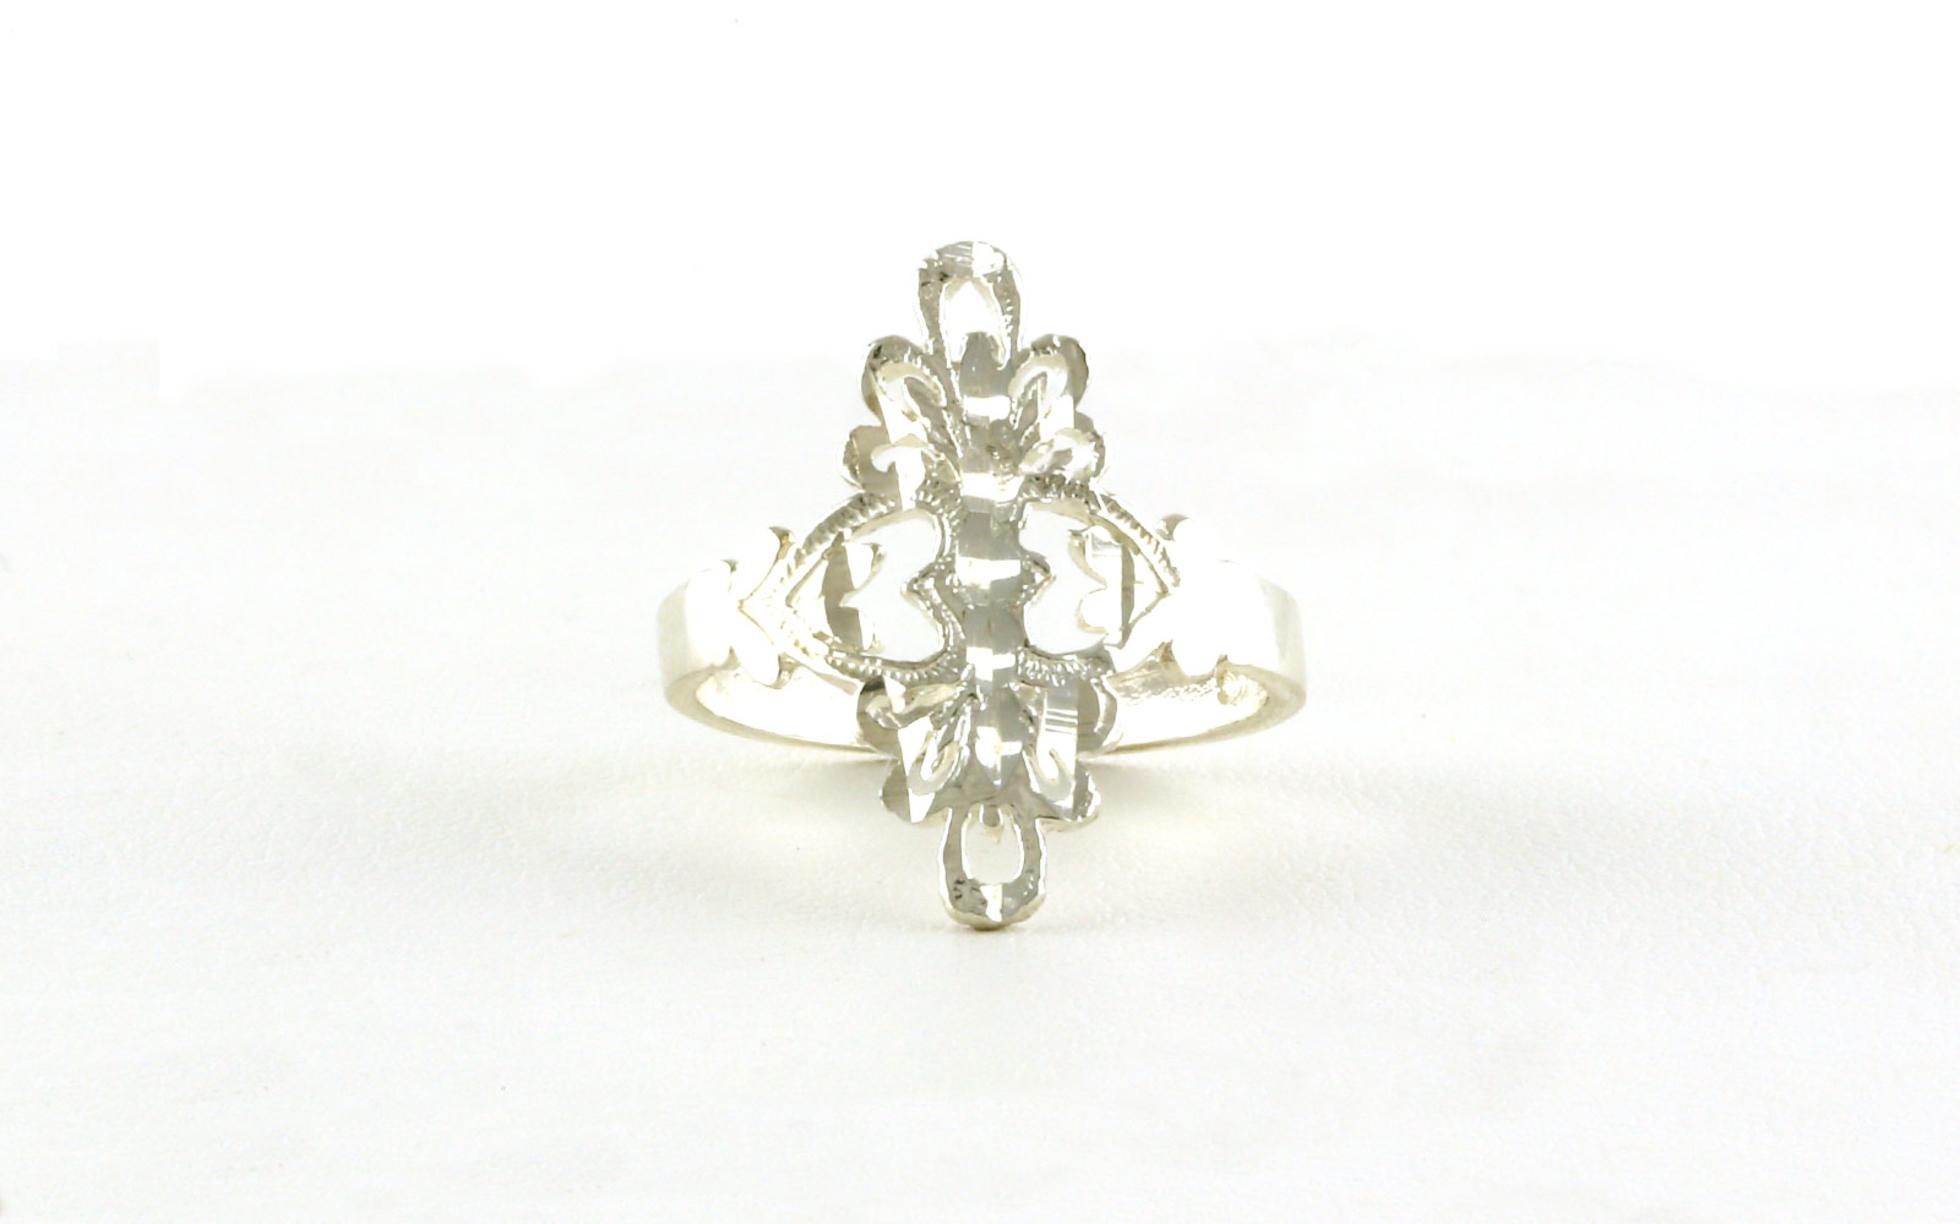 Estate Piece: Double Heart Design Filigree Ring in Sterling Silver